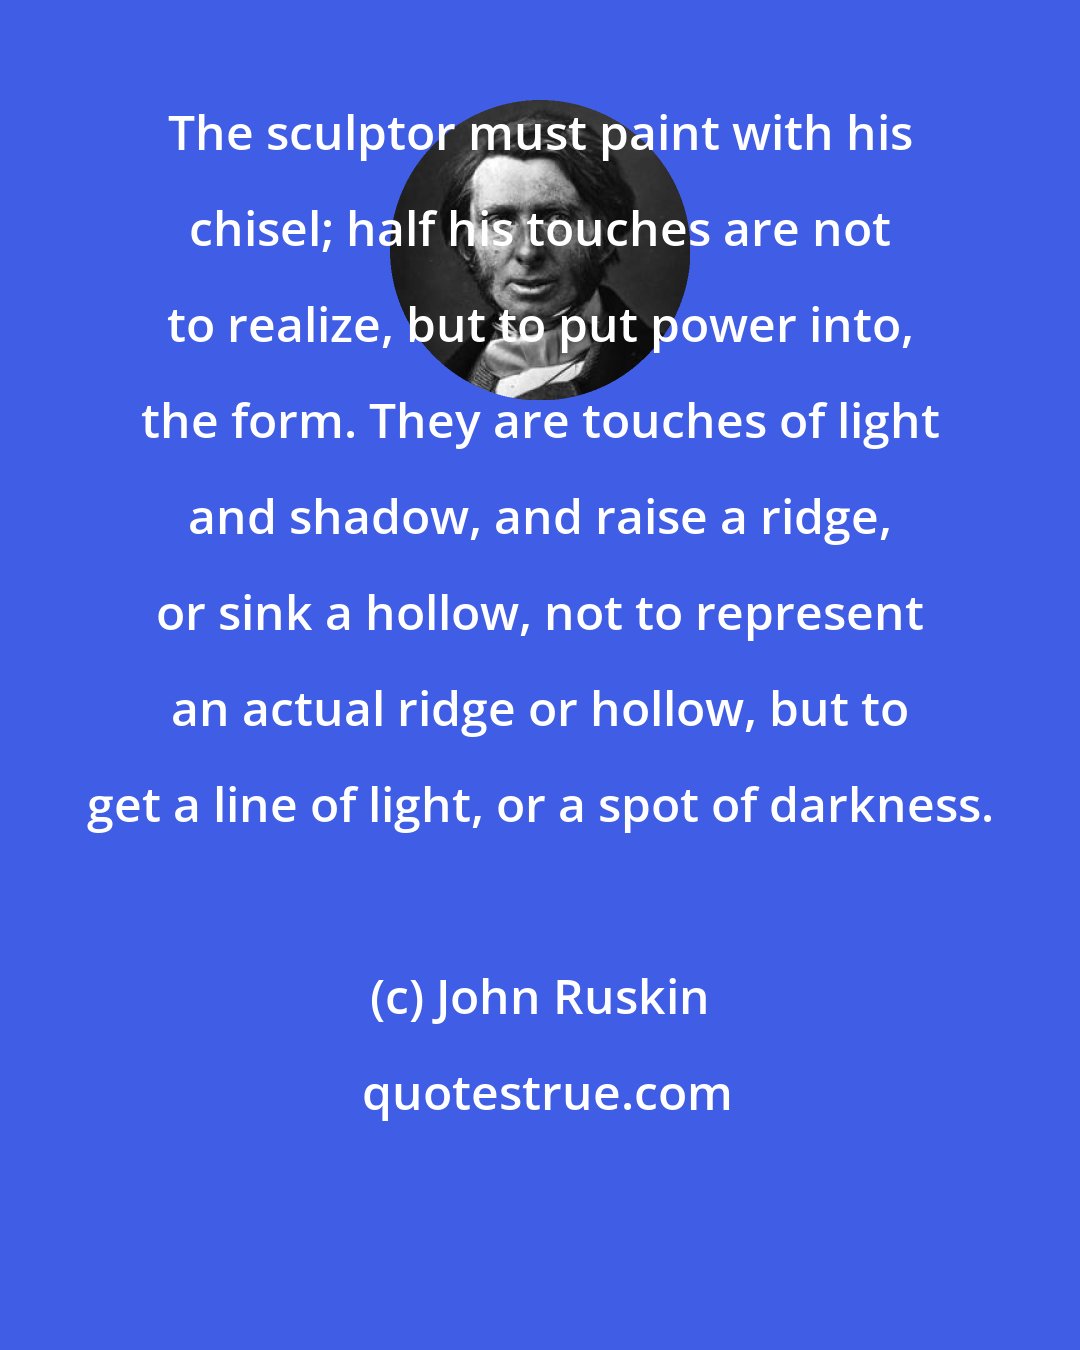 John Ruskin: The sculptor must paint with his chisel; half his touches are not to realize, but to put power into, the form. They are touches of light and shadow, and raise a ridge, or sink a hollow, not to represent an actual ridge or hollow, but to get a line of light, or a spot of darkness.